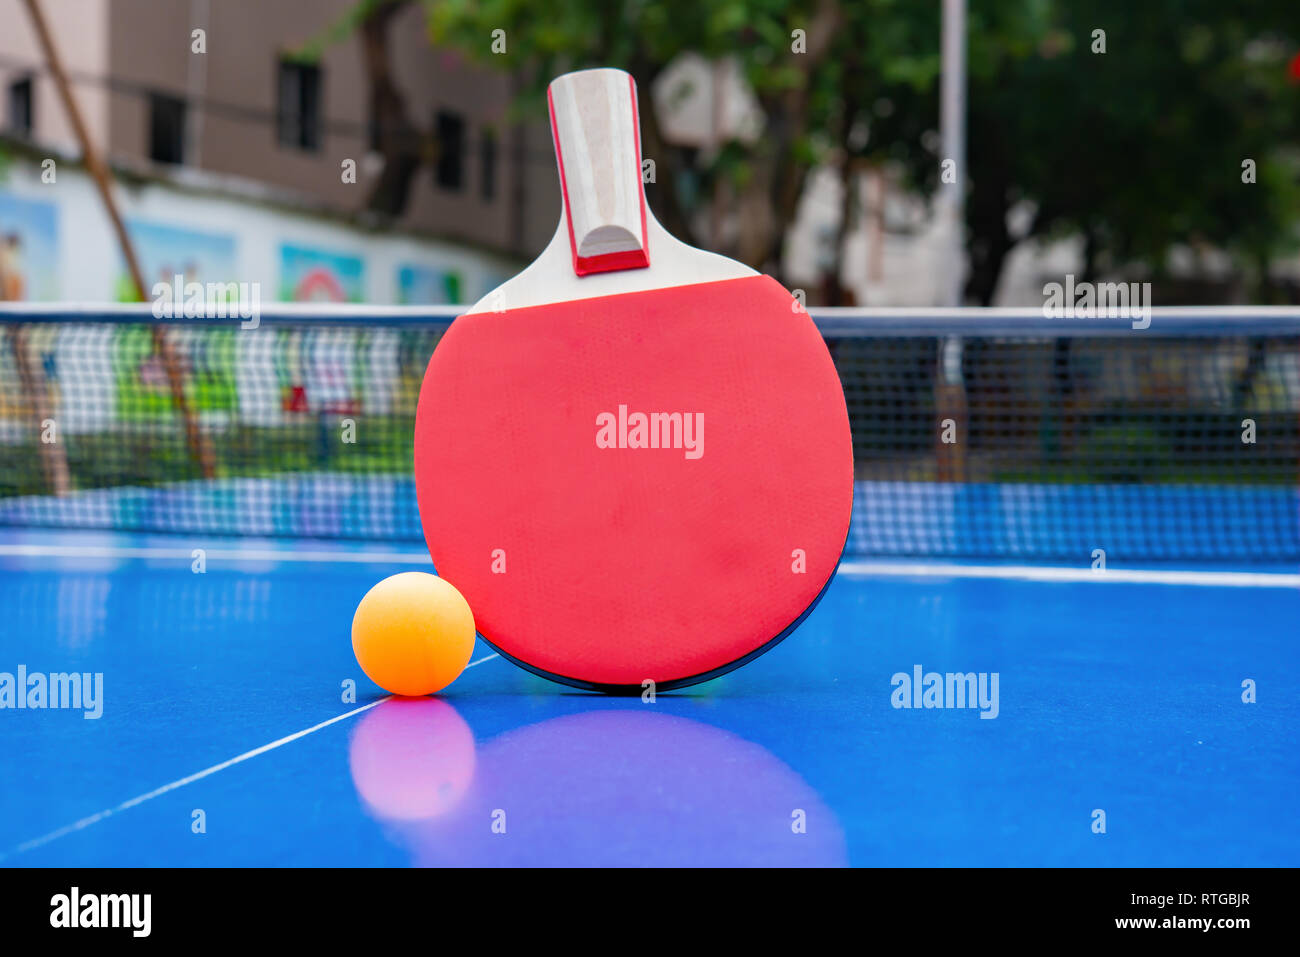 pingpong racket and ball and net on a blue pingpong table in a park Stock Photo